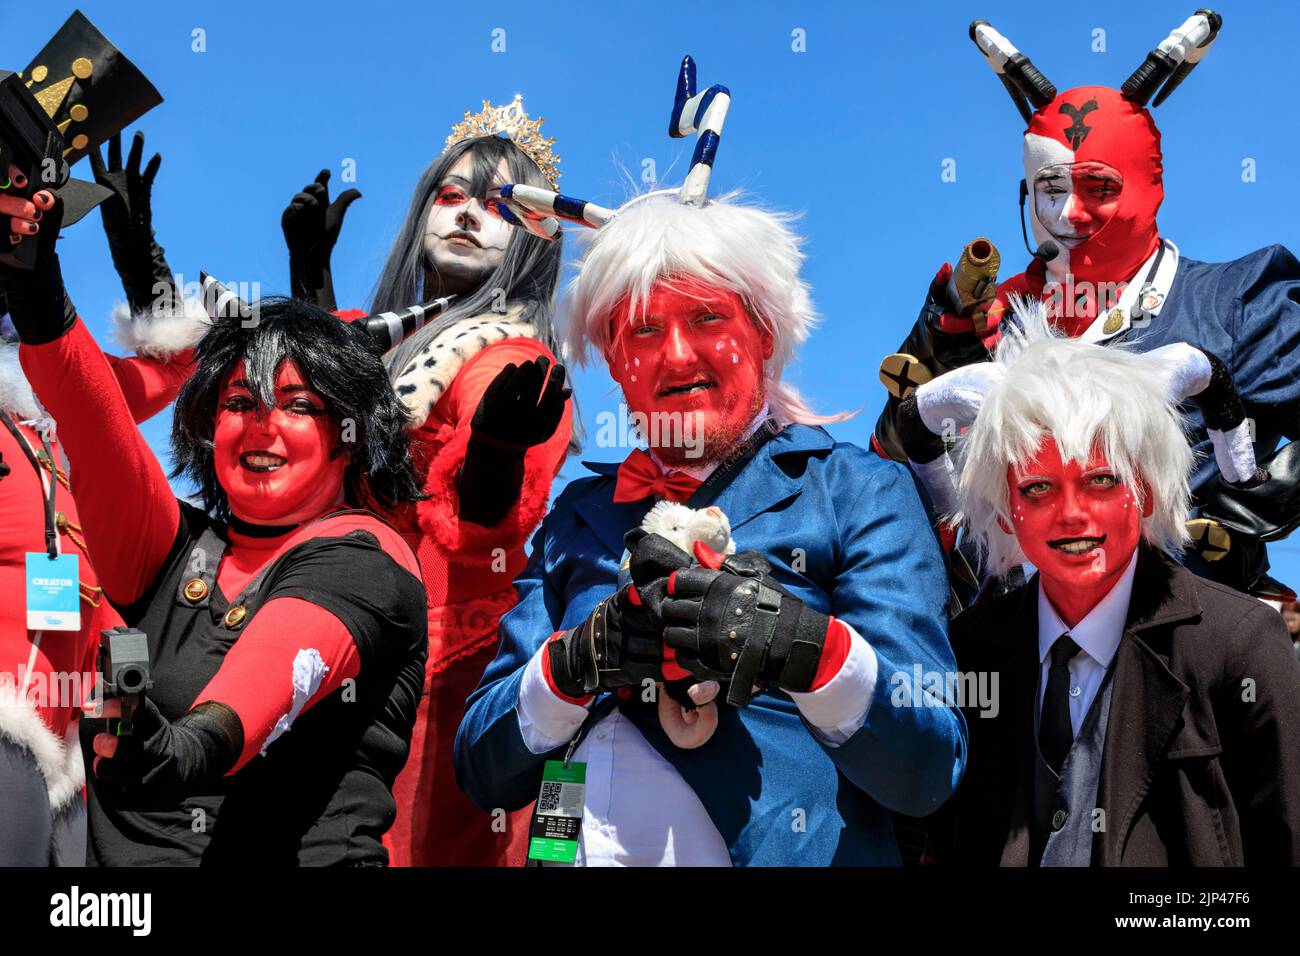 A group cosplayers pose as characters from YouTube anime Hell of A Boss, London Comic Con Stock Photo